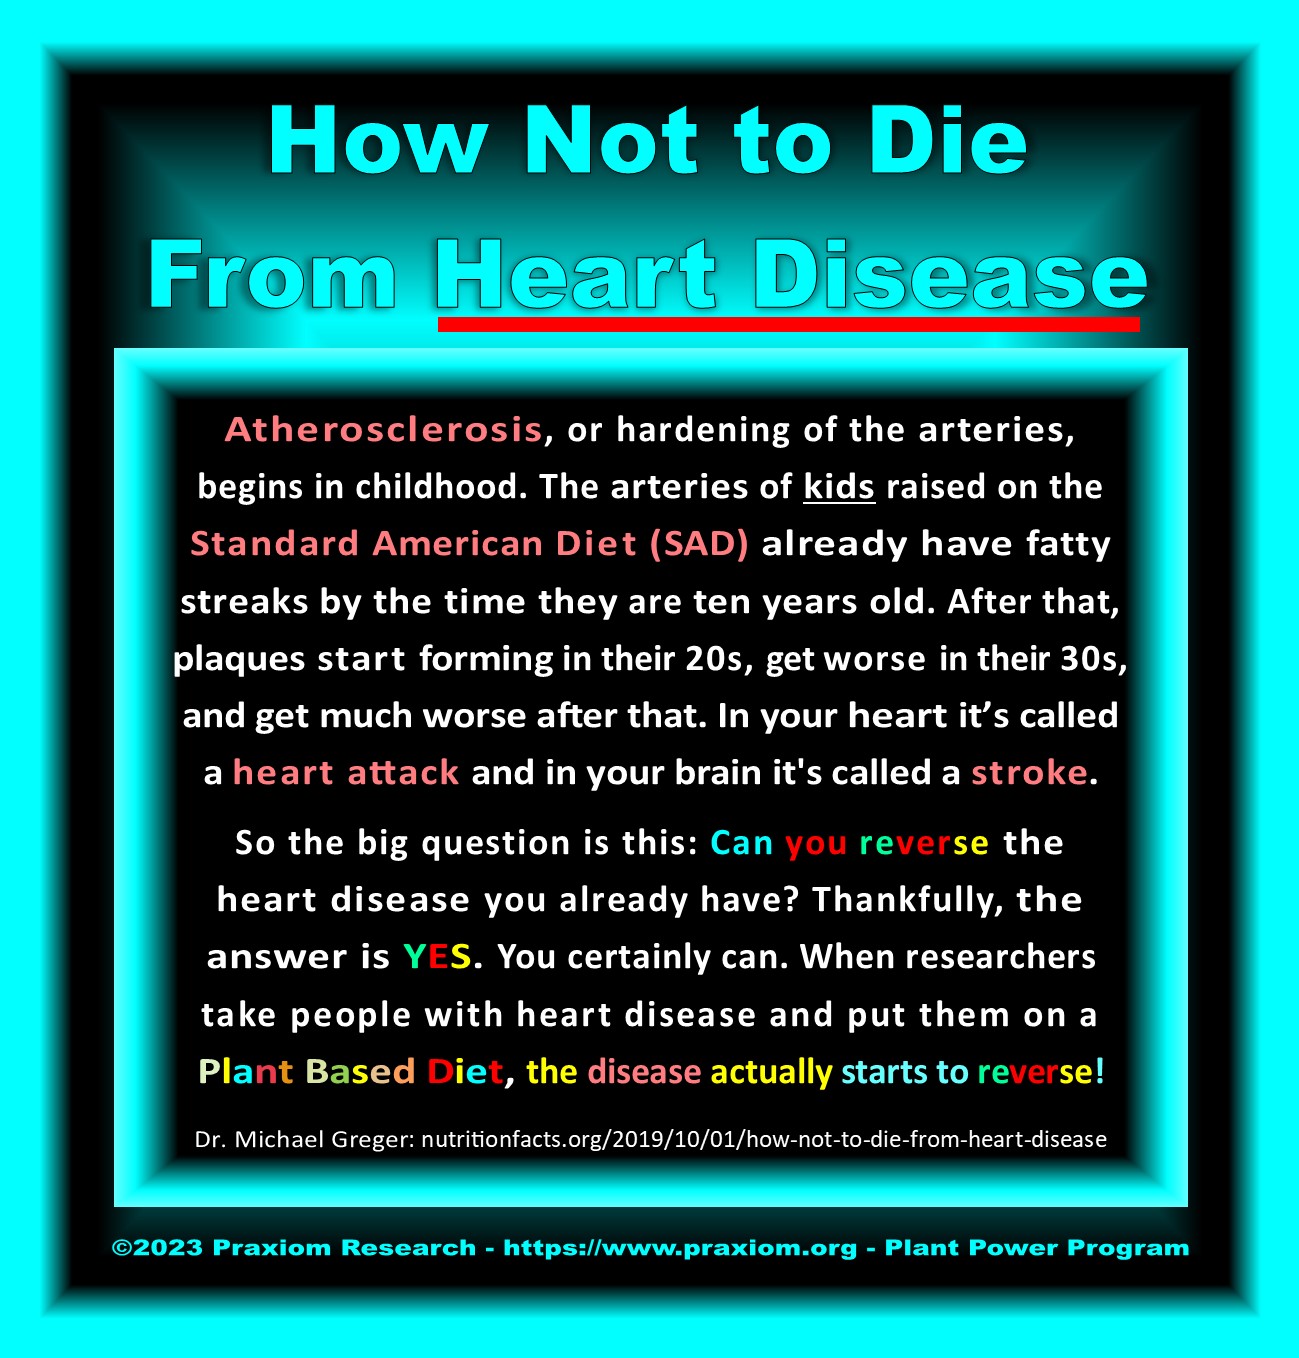 How Not to Die from Heart Disease